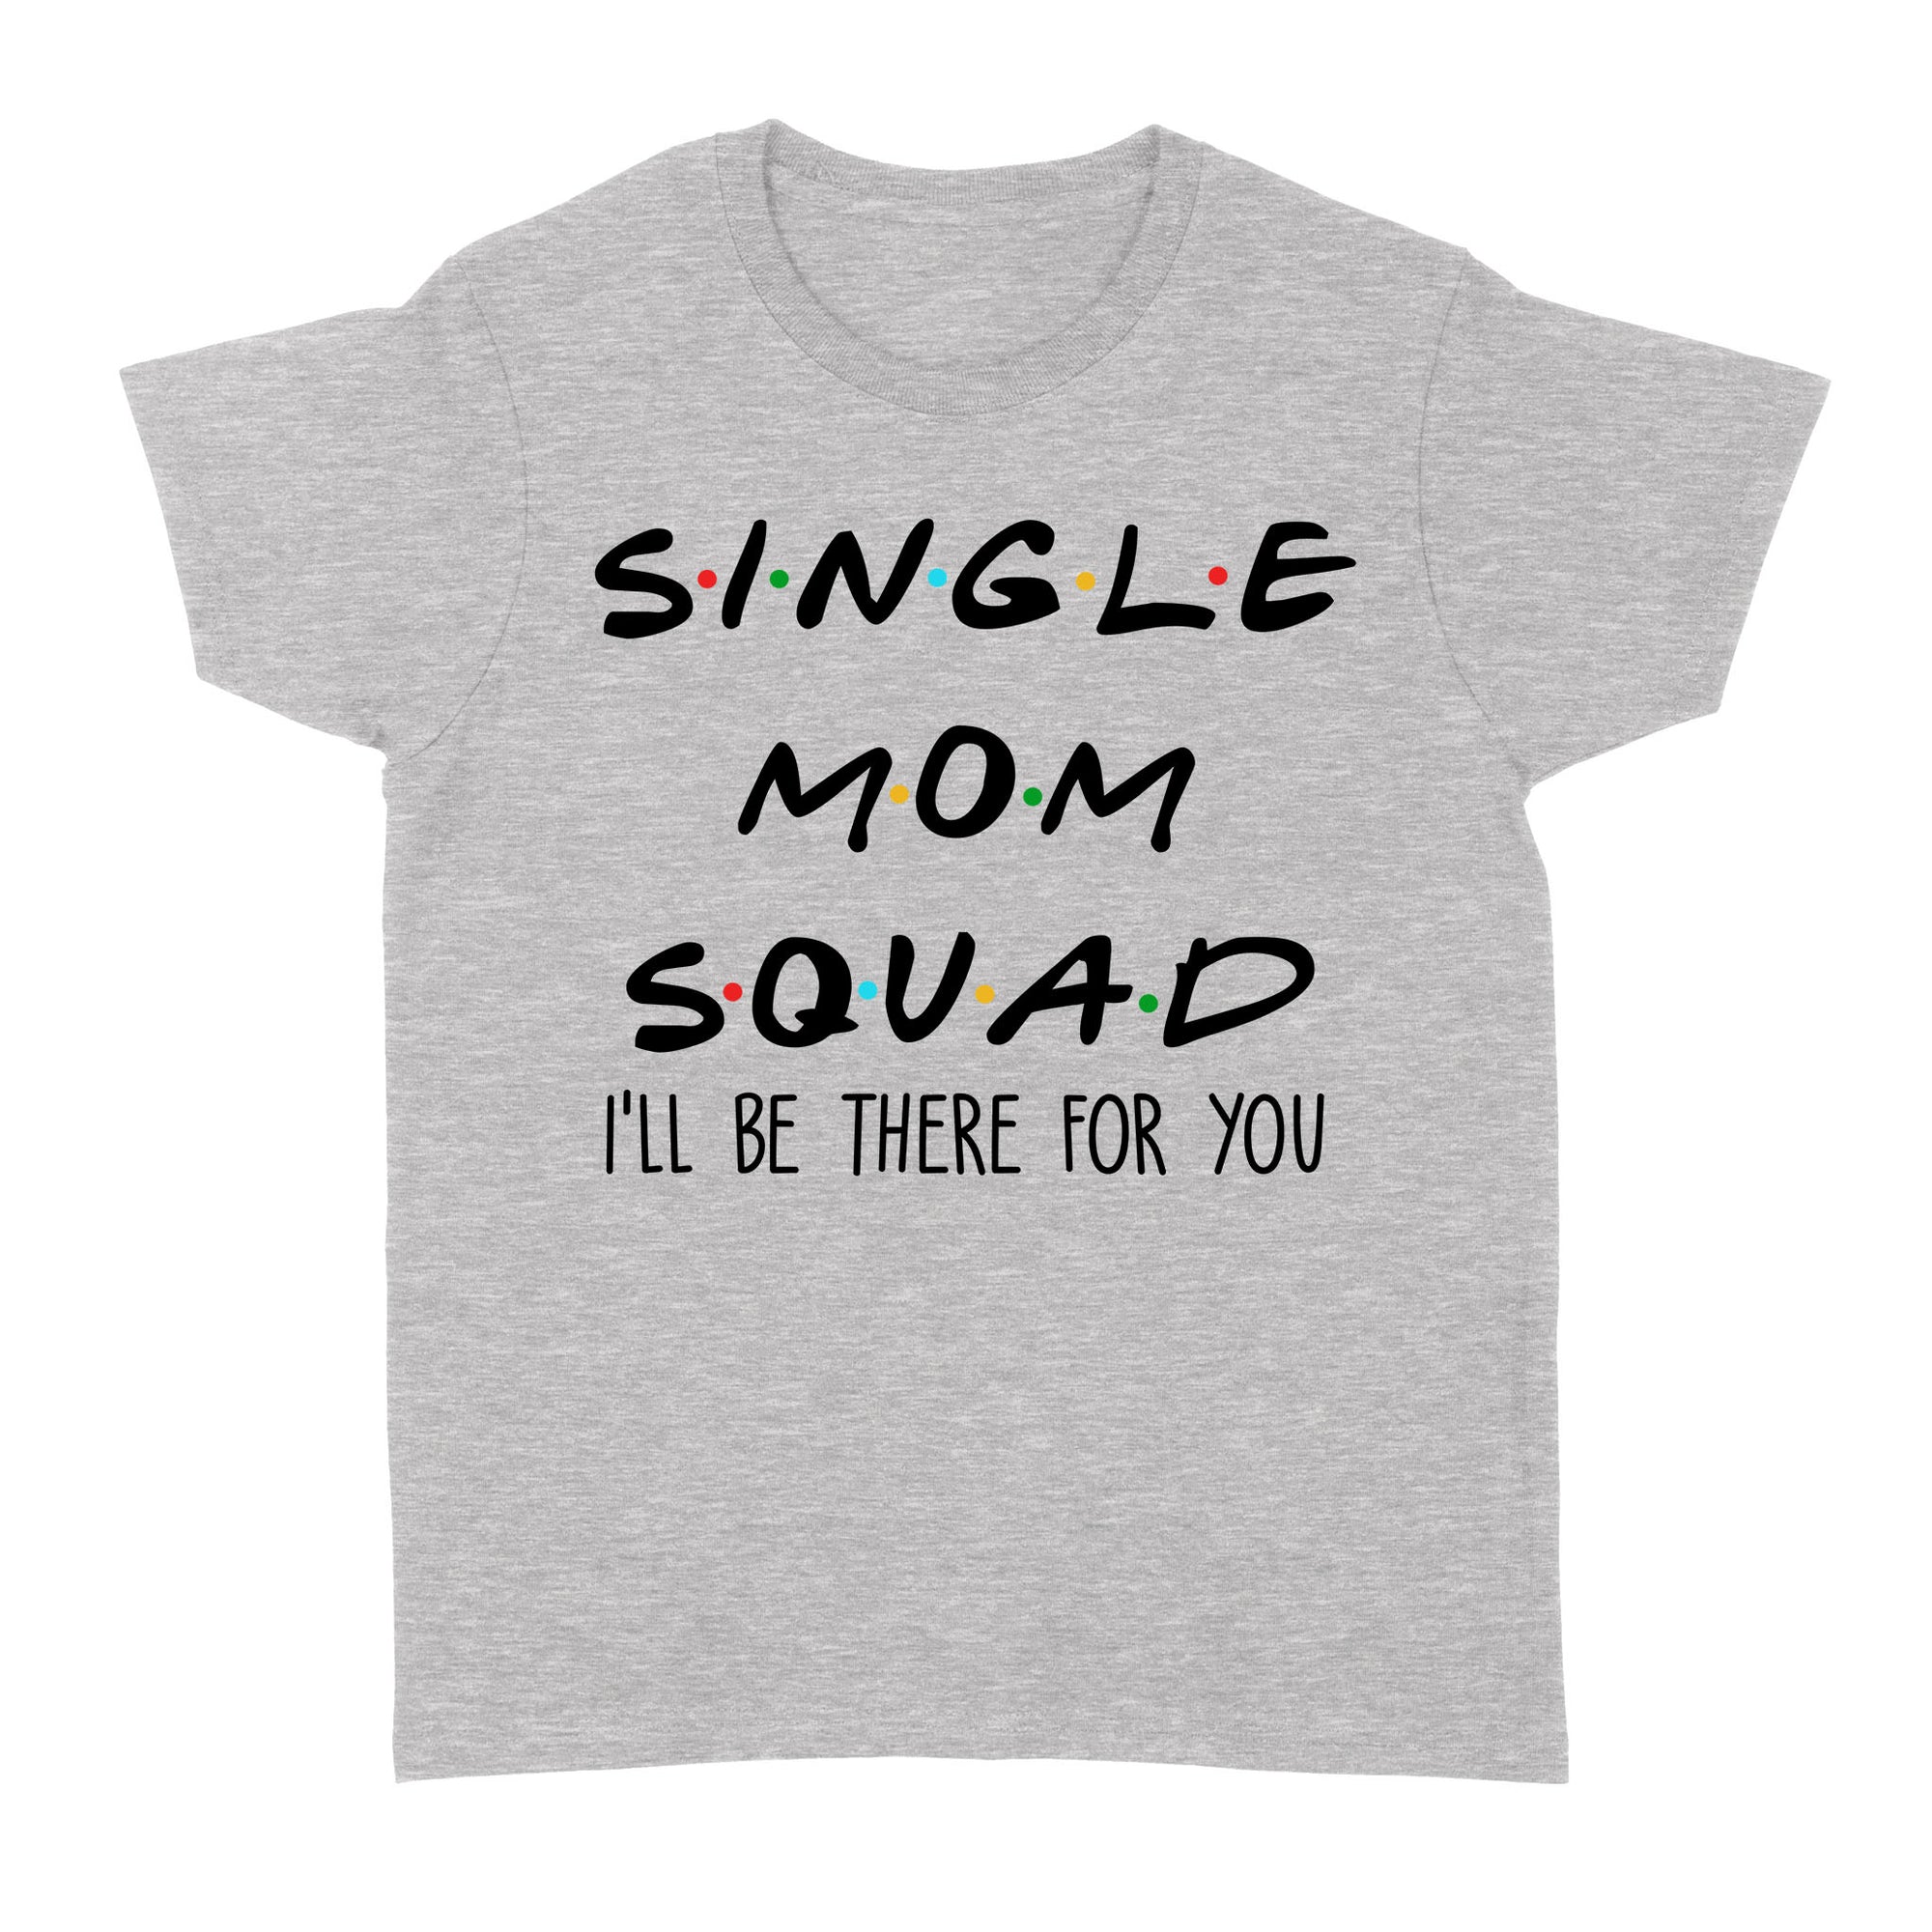 Single Mom Squad I'll Be There For You Friends Funnt Gift Ideas for Single Mom - Standard Women's T-shirt